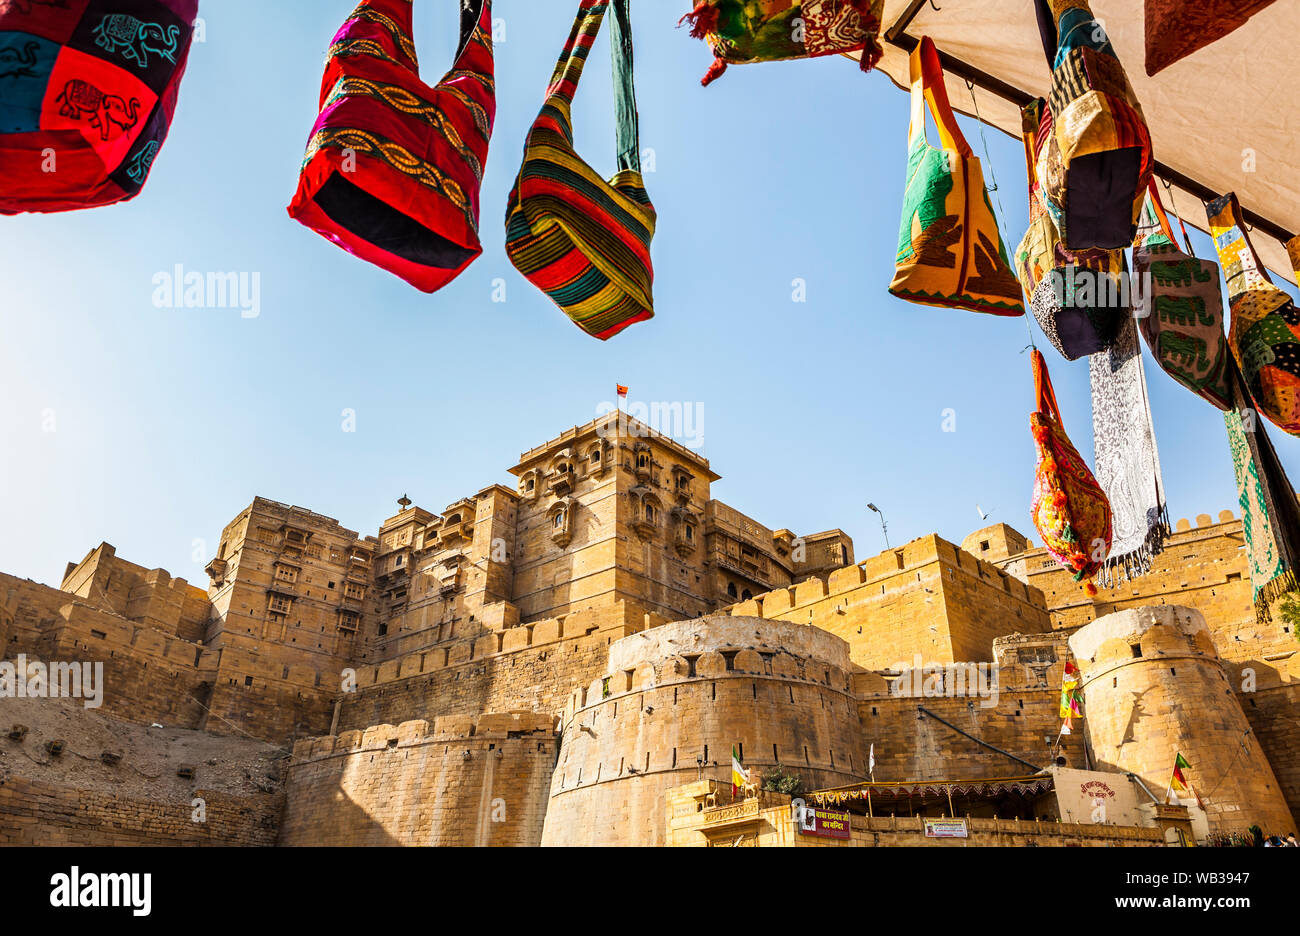 Outside the entrance to Jaisalmer Fort, Rajasthan, India. Stock Photo